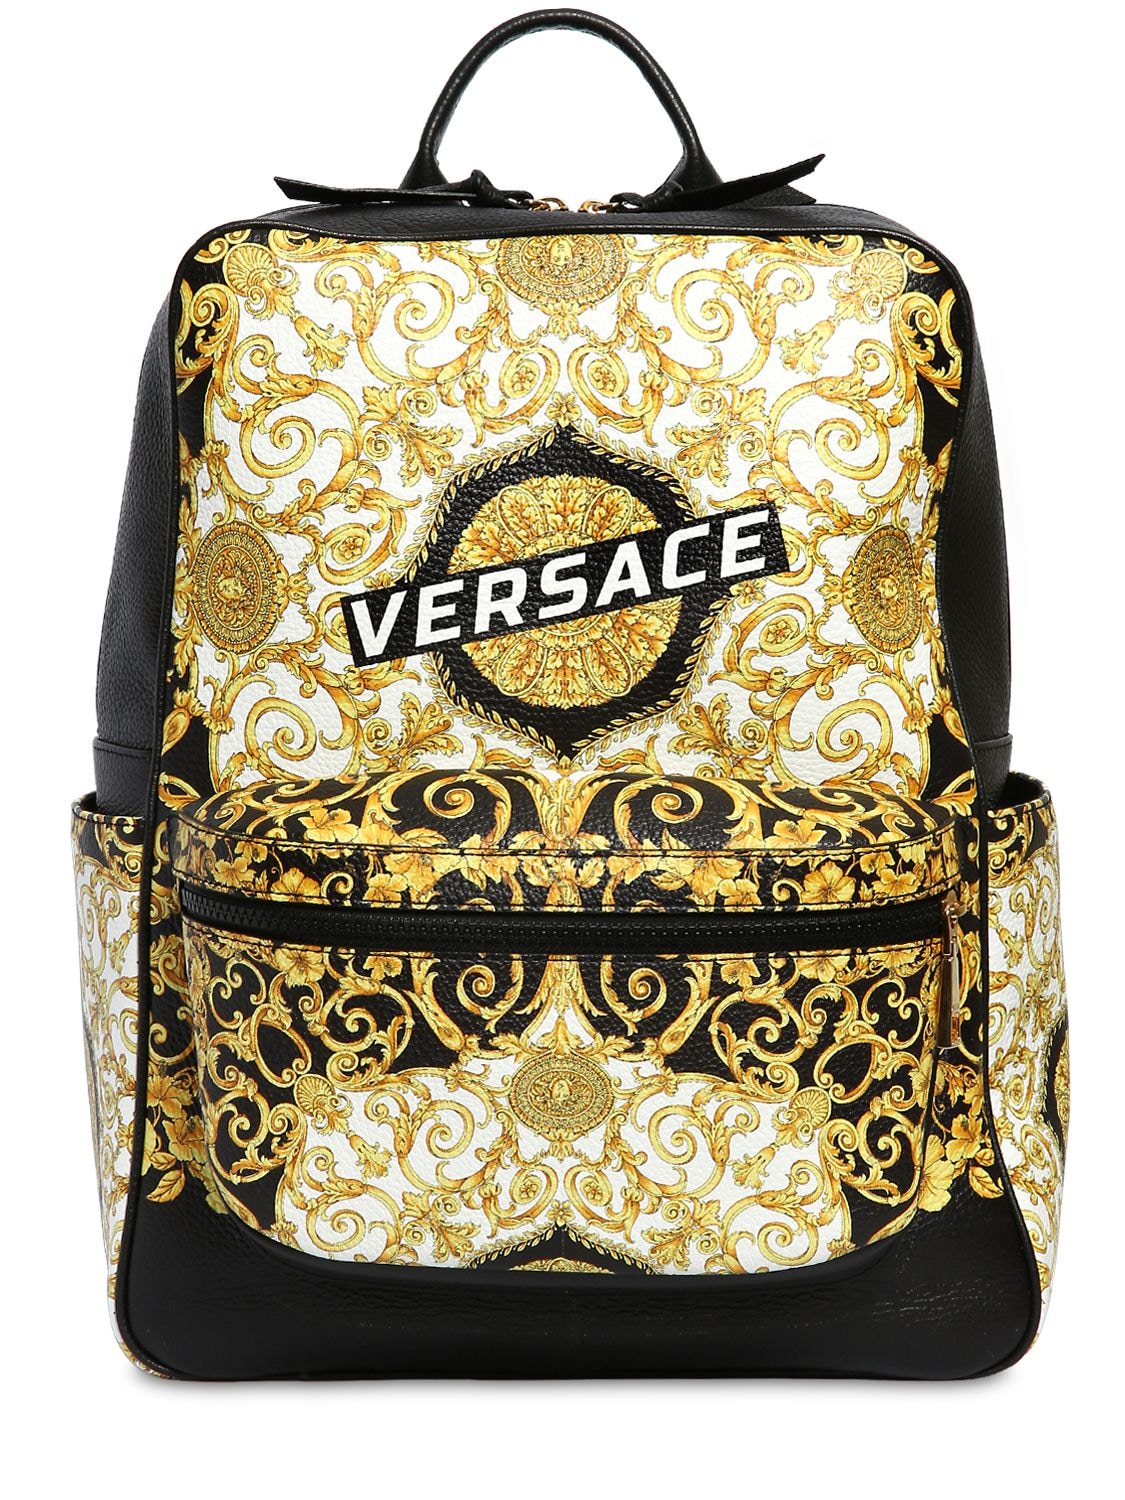 VERSACE LOGO BAROQUE PRINT LEATHER BACKPACK,69IJS1001-RE1ST0G1